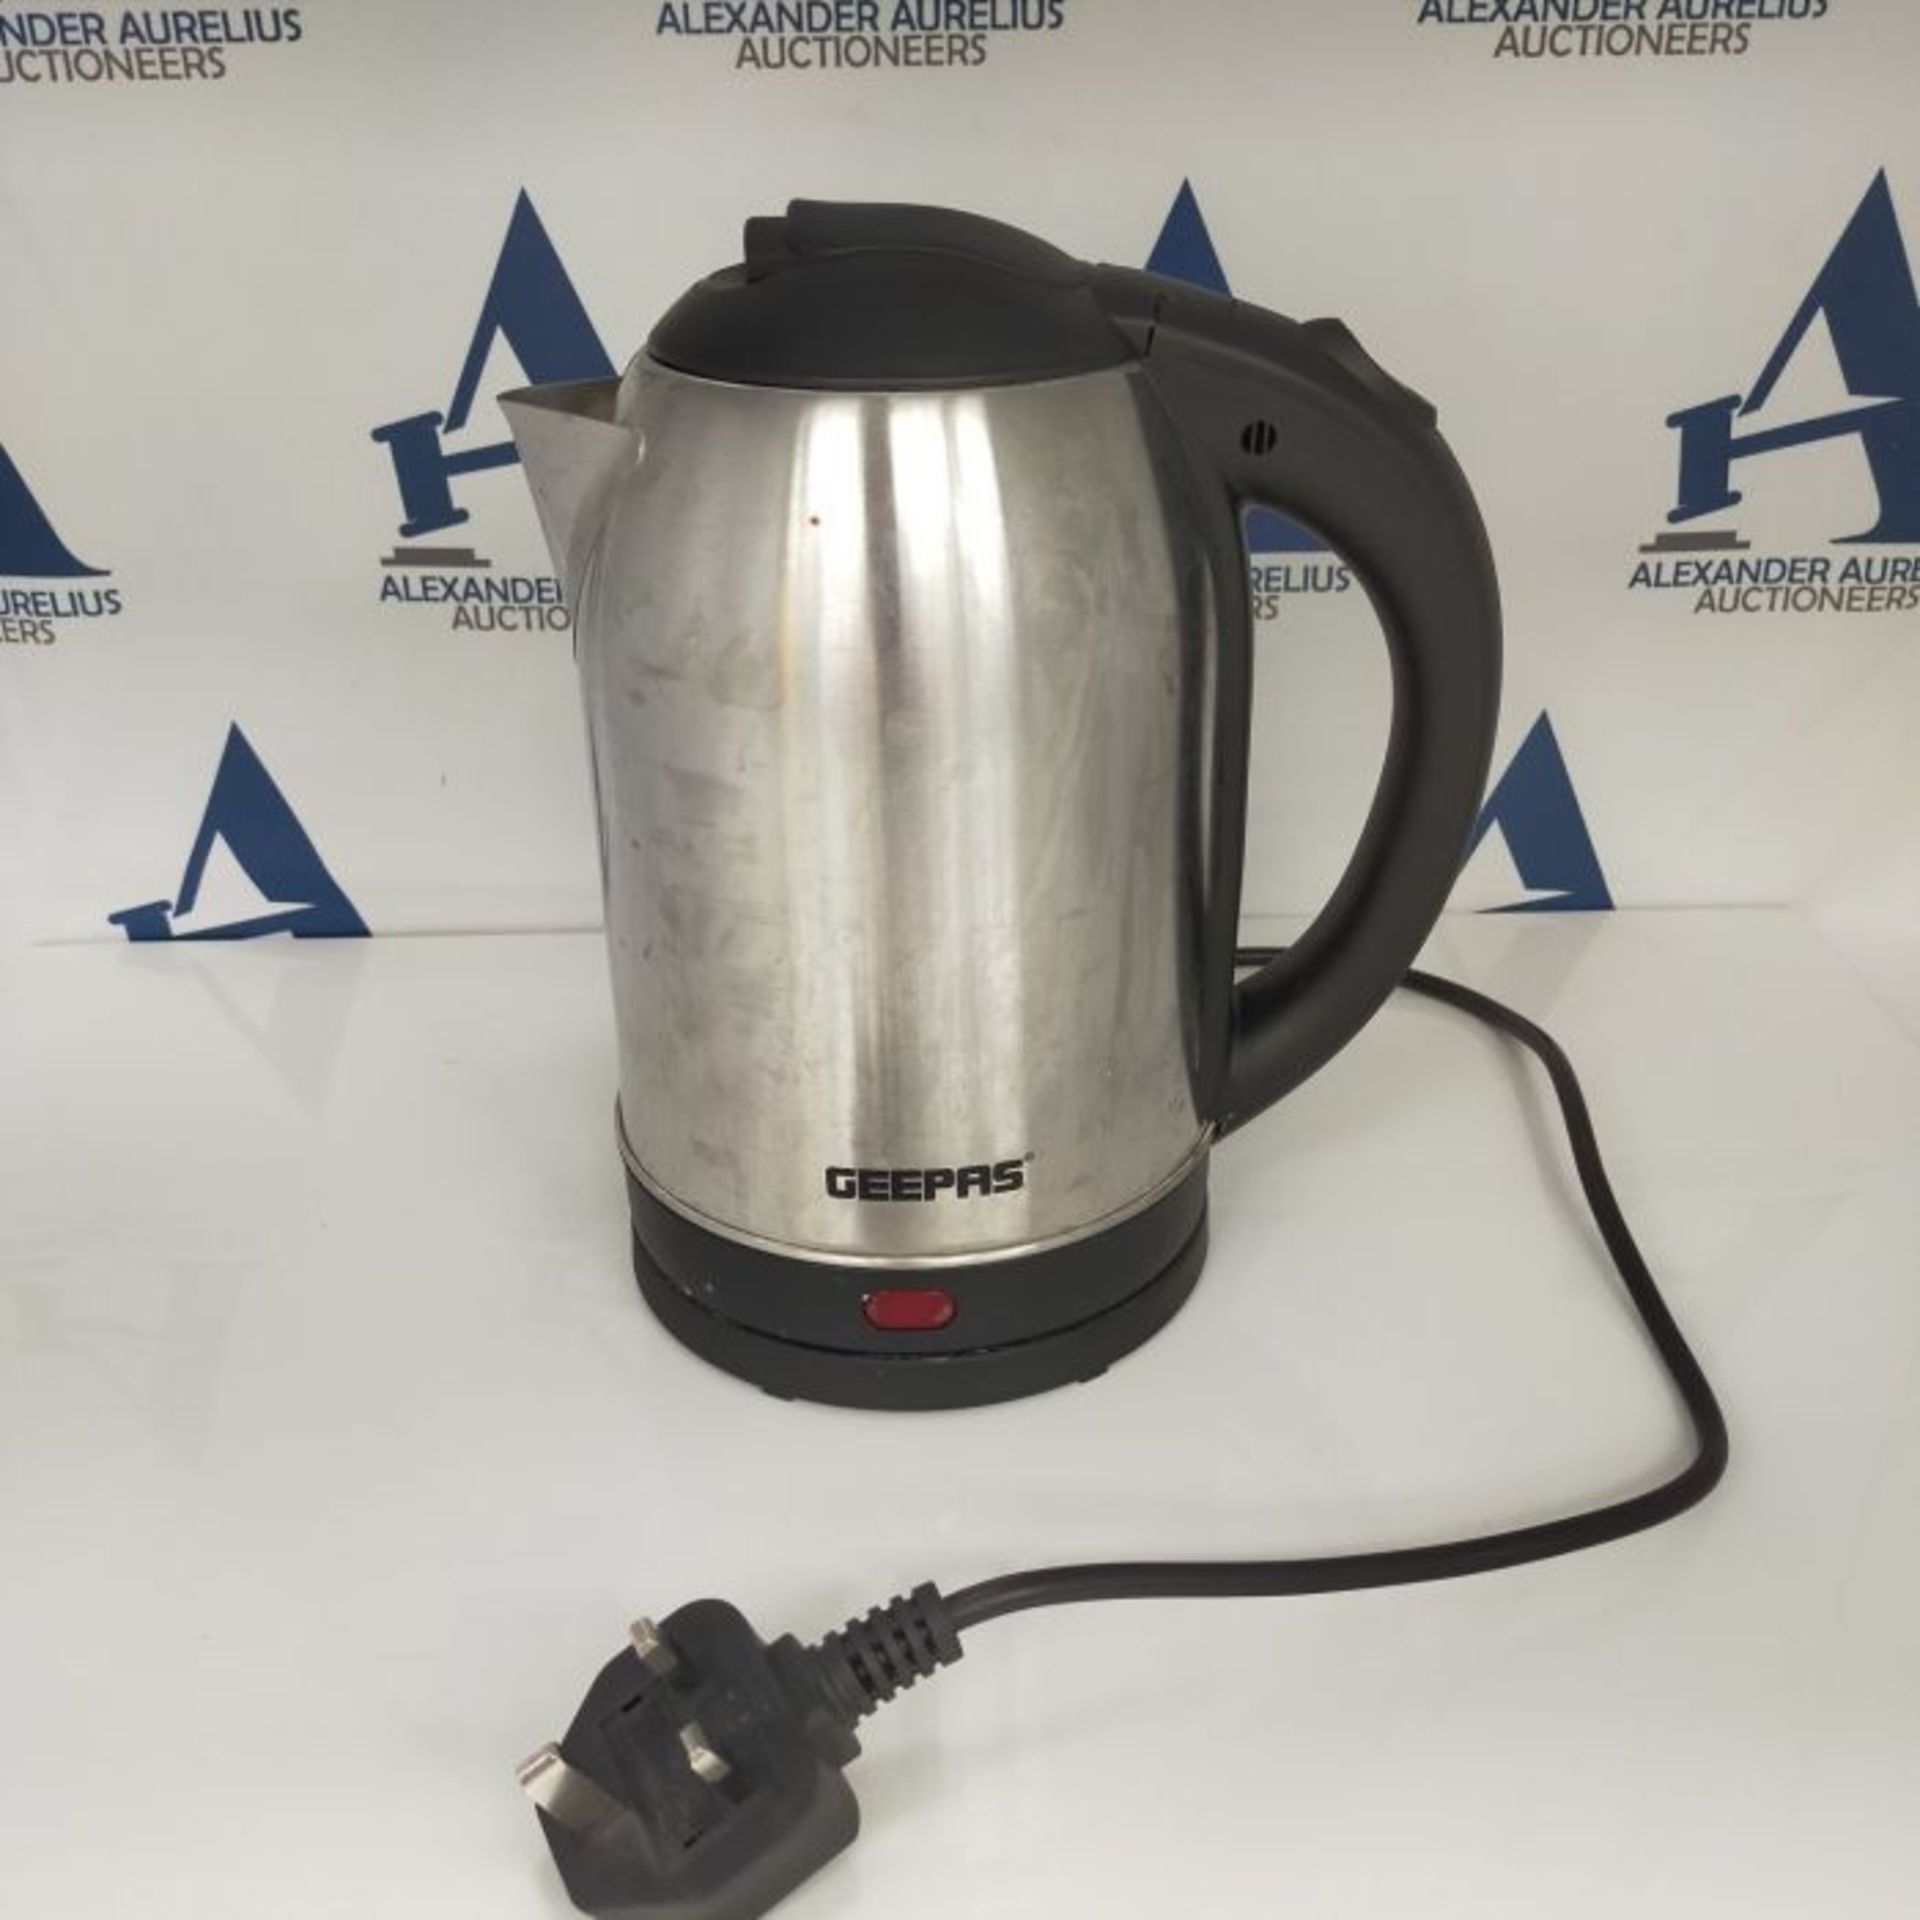 Geepas Electric Kettle, 1500W | Stainless Steel Cordless Kettle | Boil Dry Protection - Image 2 of 2